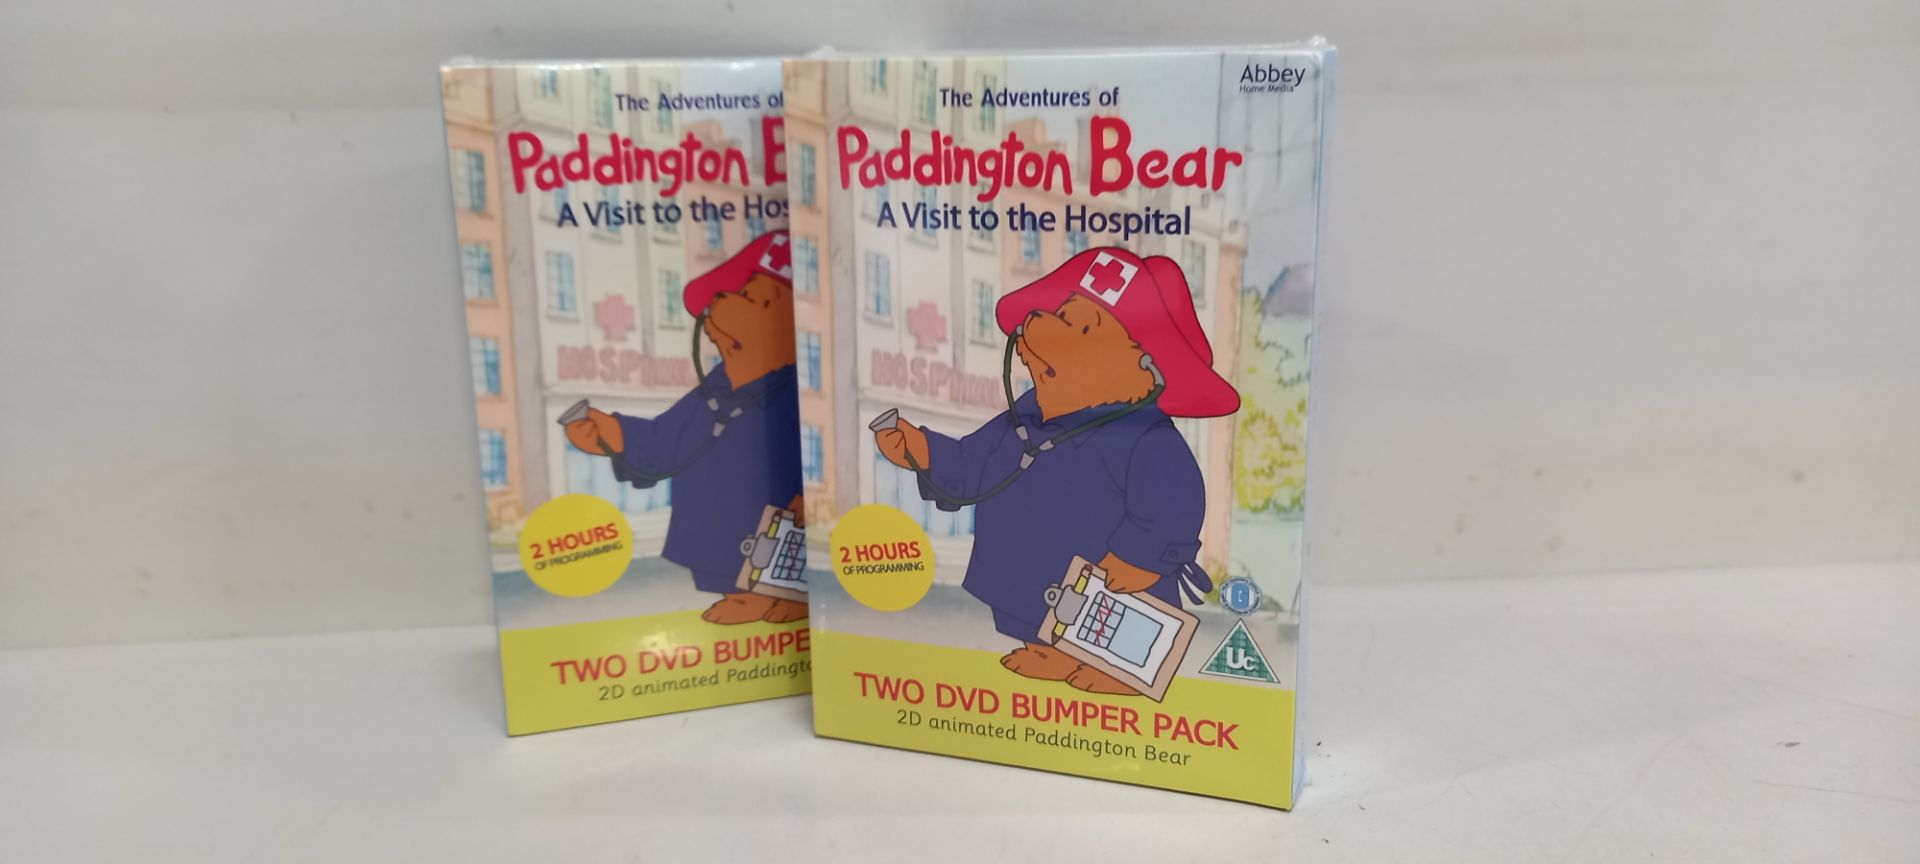 120 X BRAND NEW THE ADVENTURES OF PADDINGTON BEAR A VISIT TO THE HOSPITAL ( 2 DVD BUMPER PACK ) -